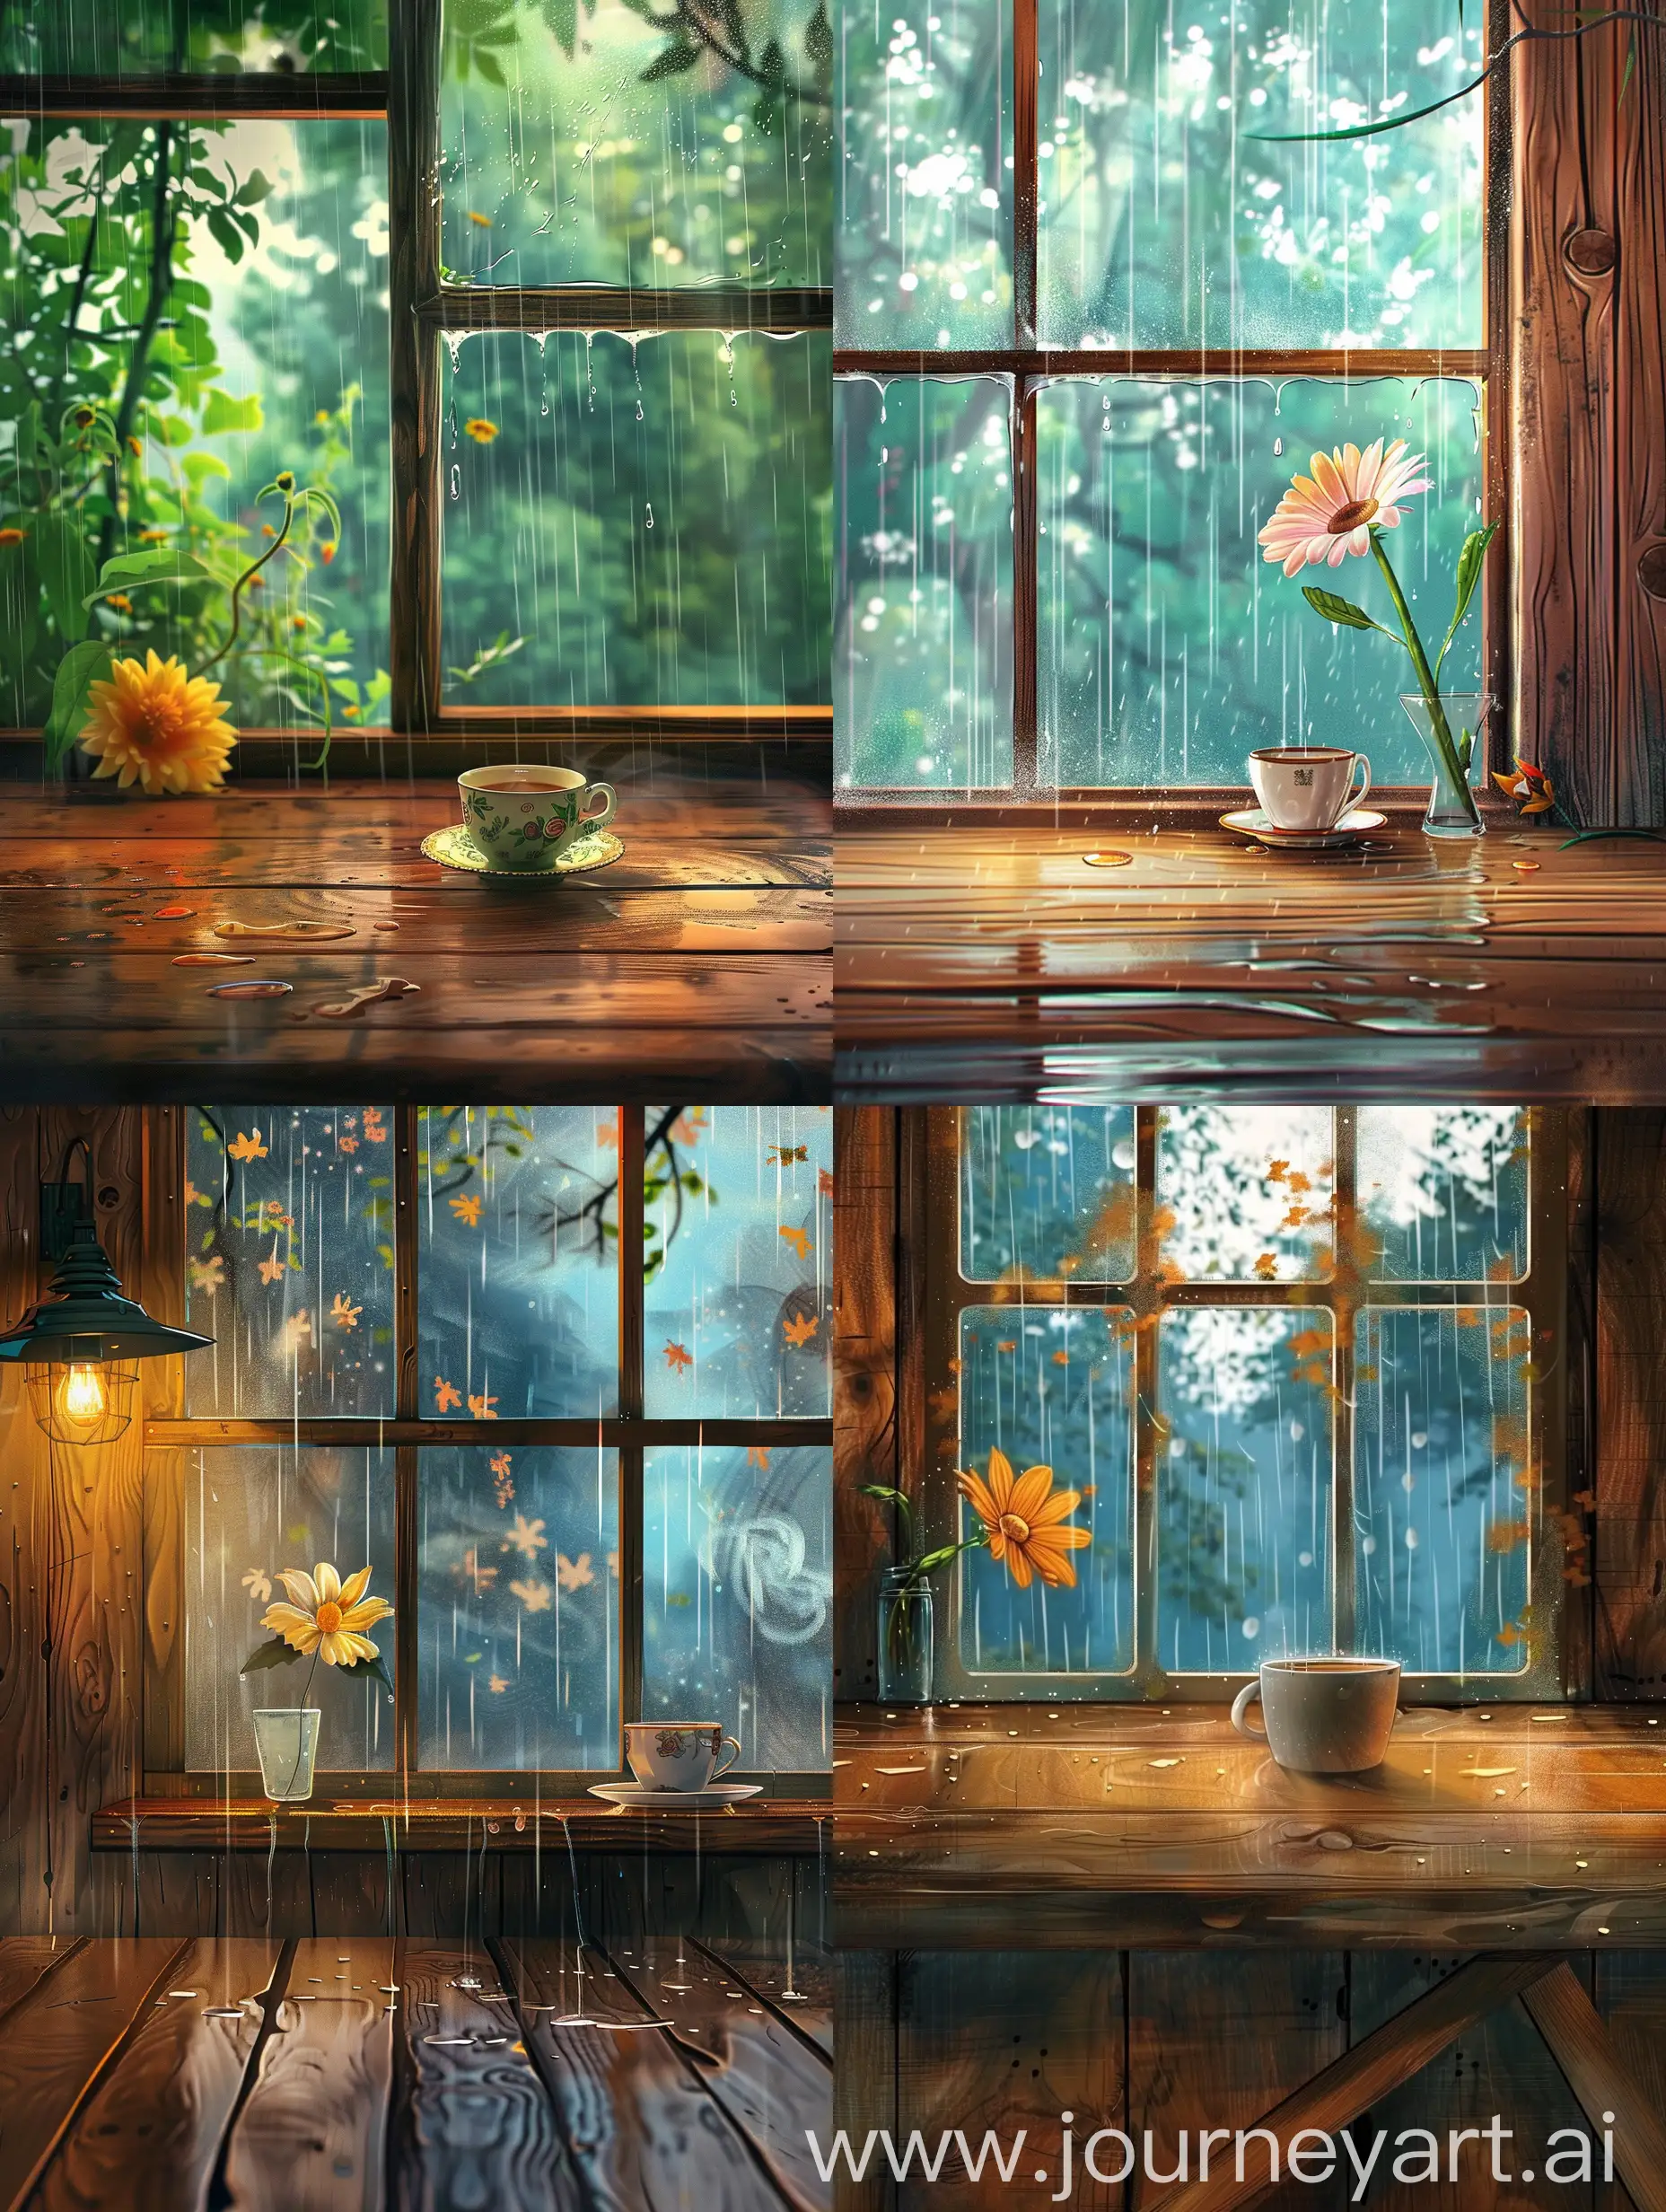 Cozy-Rainy-Day-Anime-Style-Scene-with-Coffee-and-Flowers-on-a-Wooden-Table